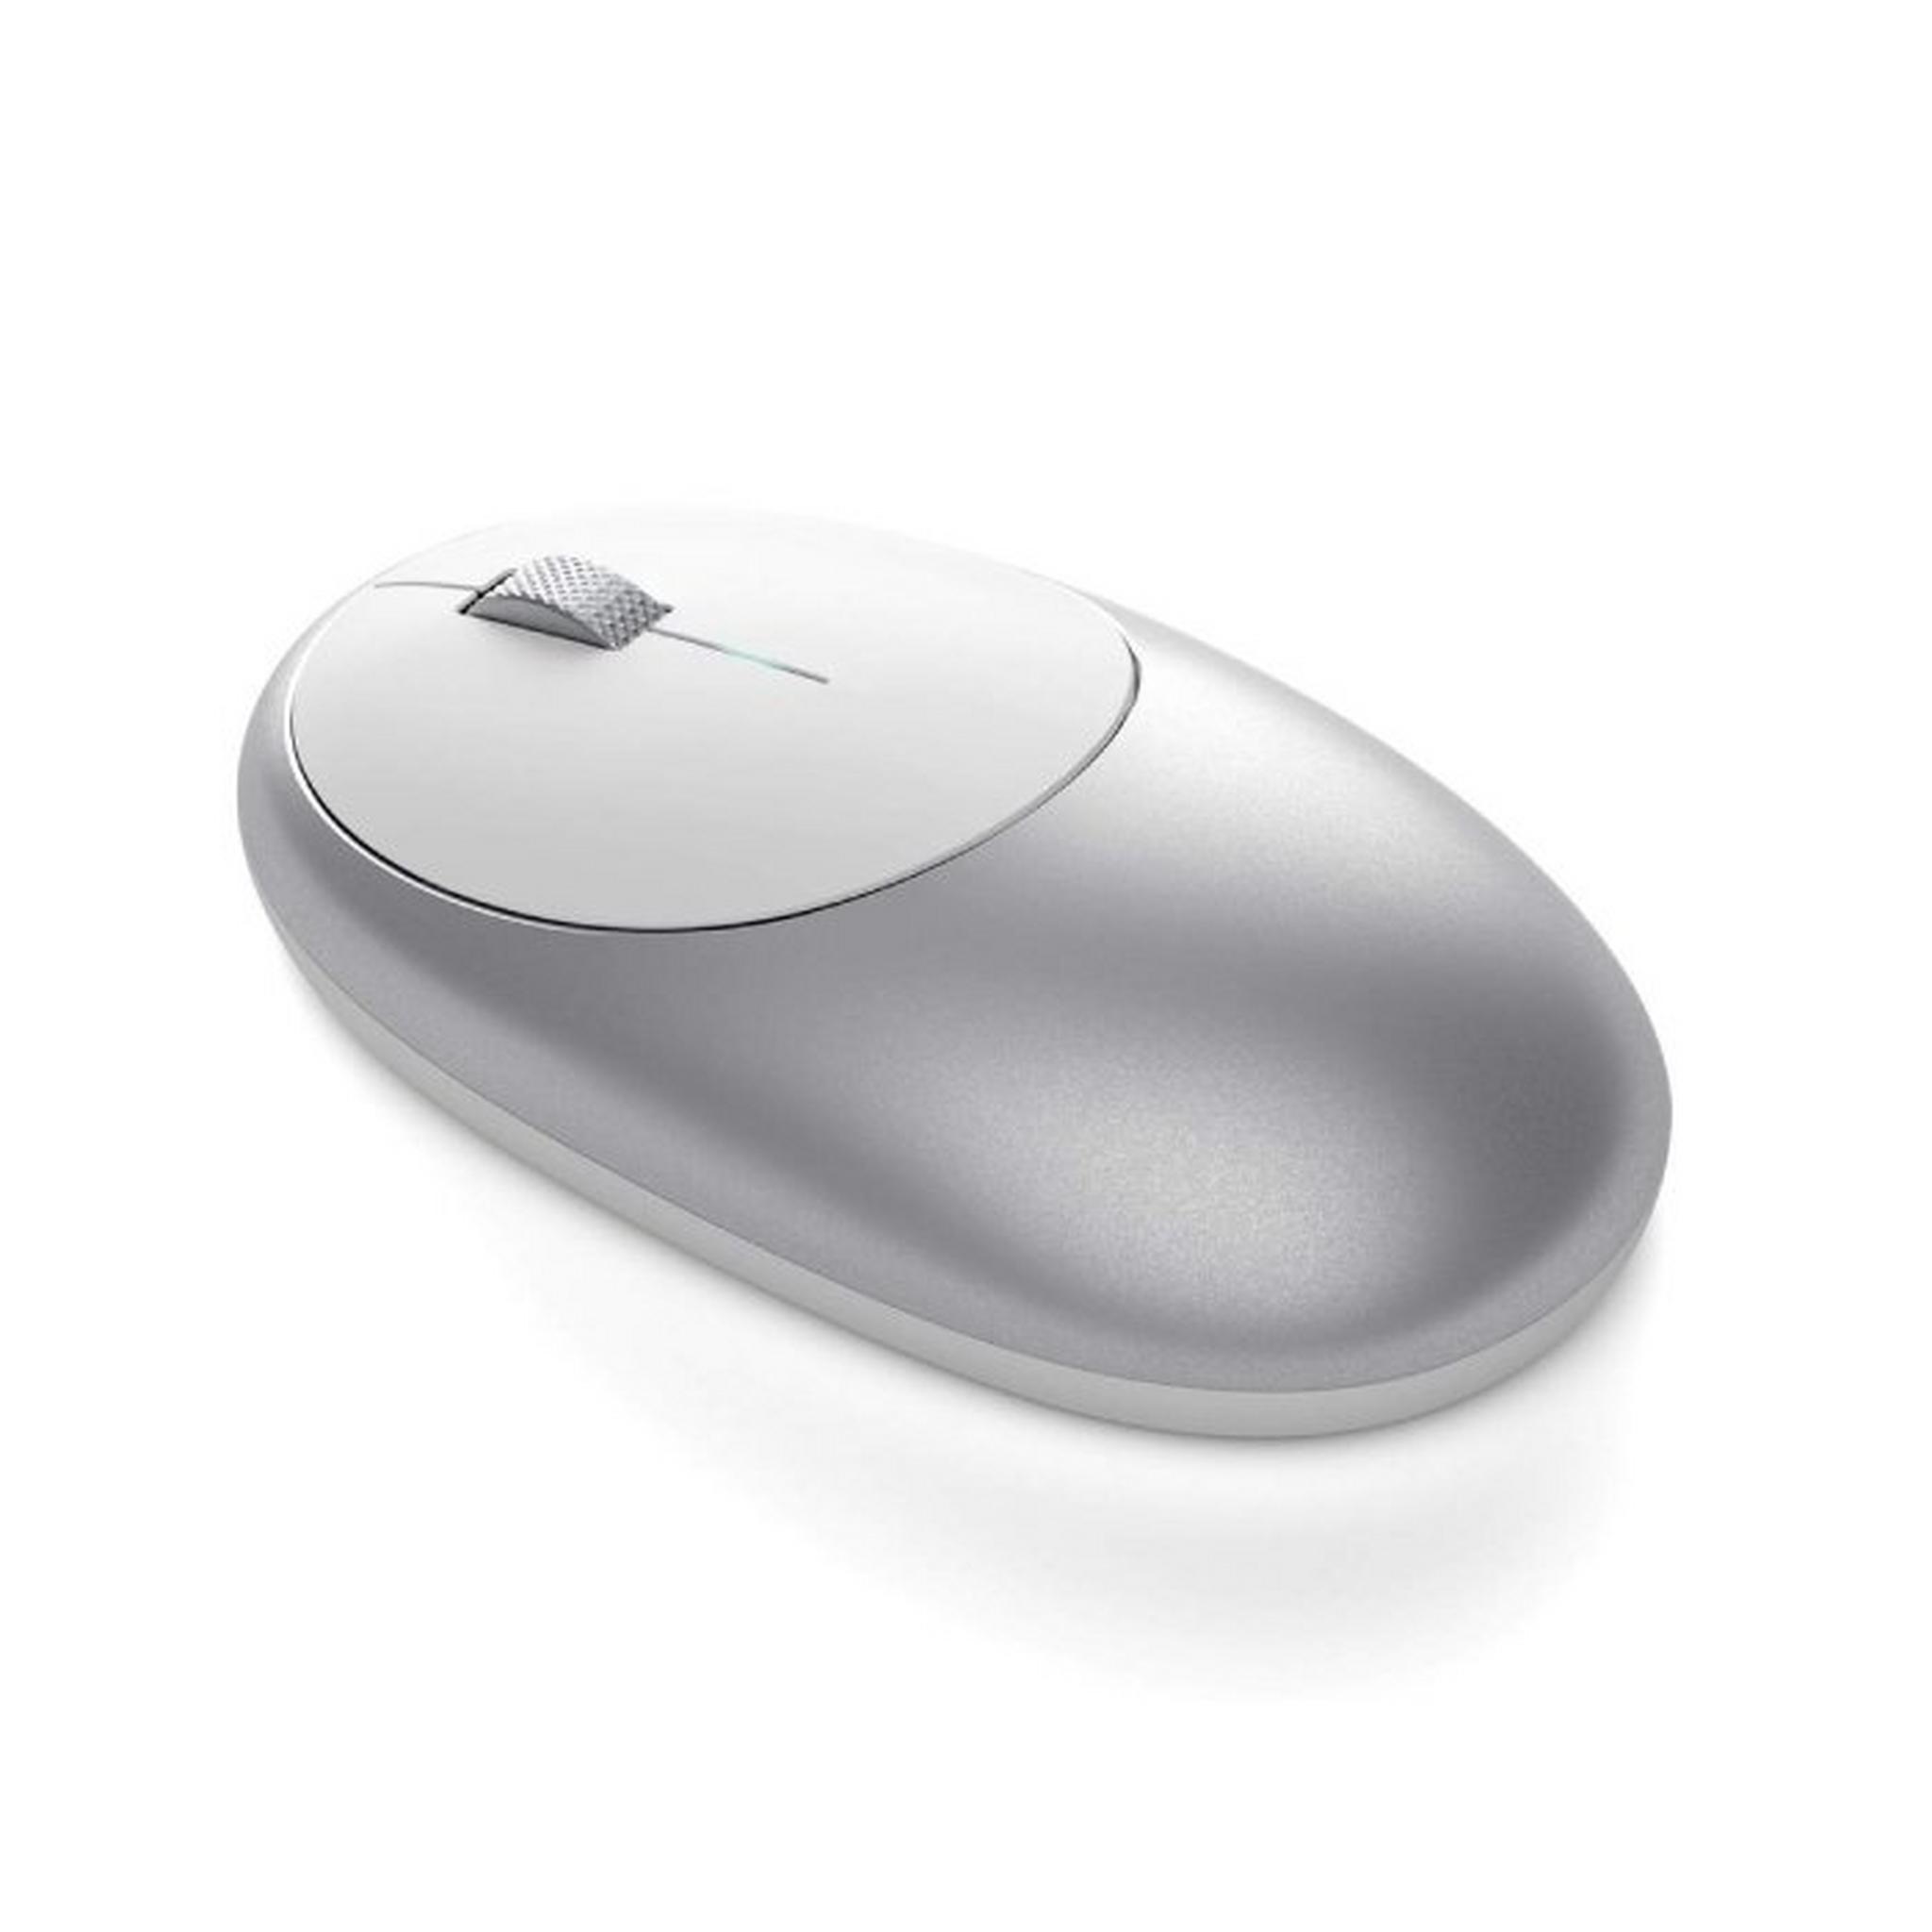 Satechi M1 Bluetooth Wireless Mouse - Sliver